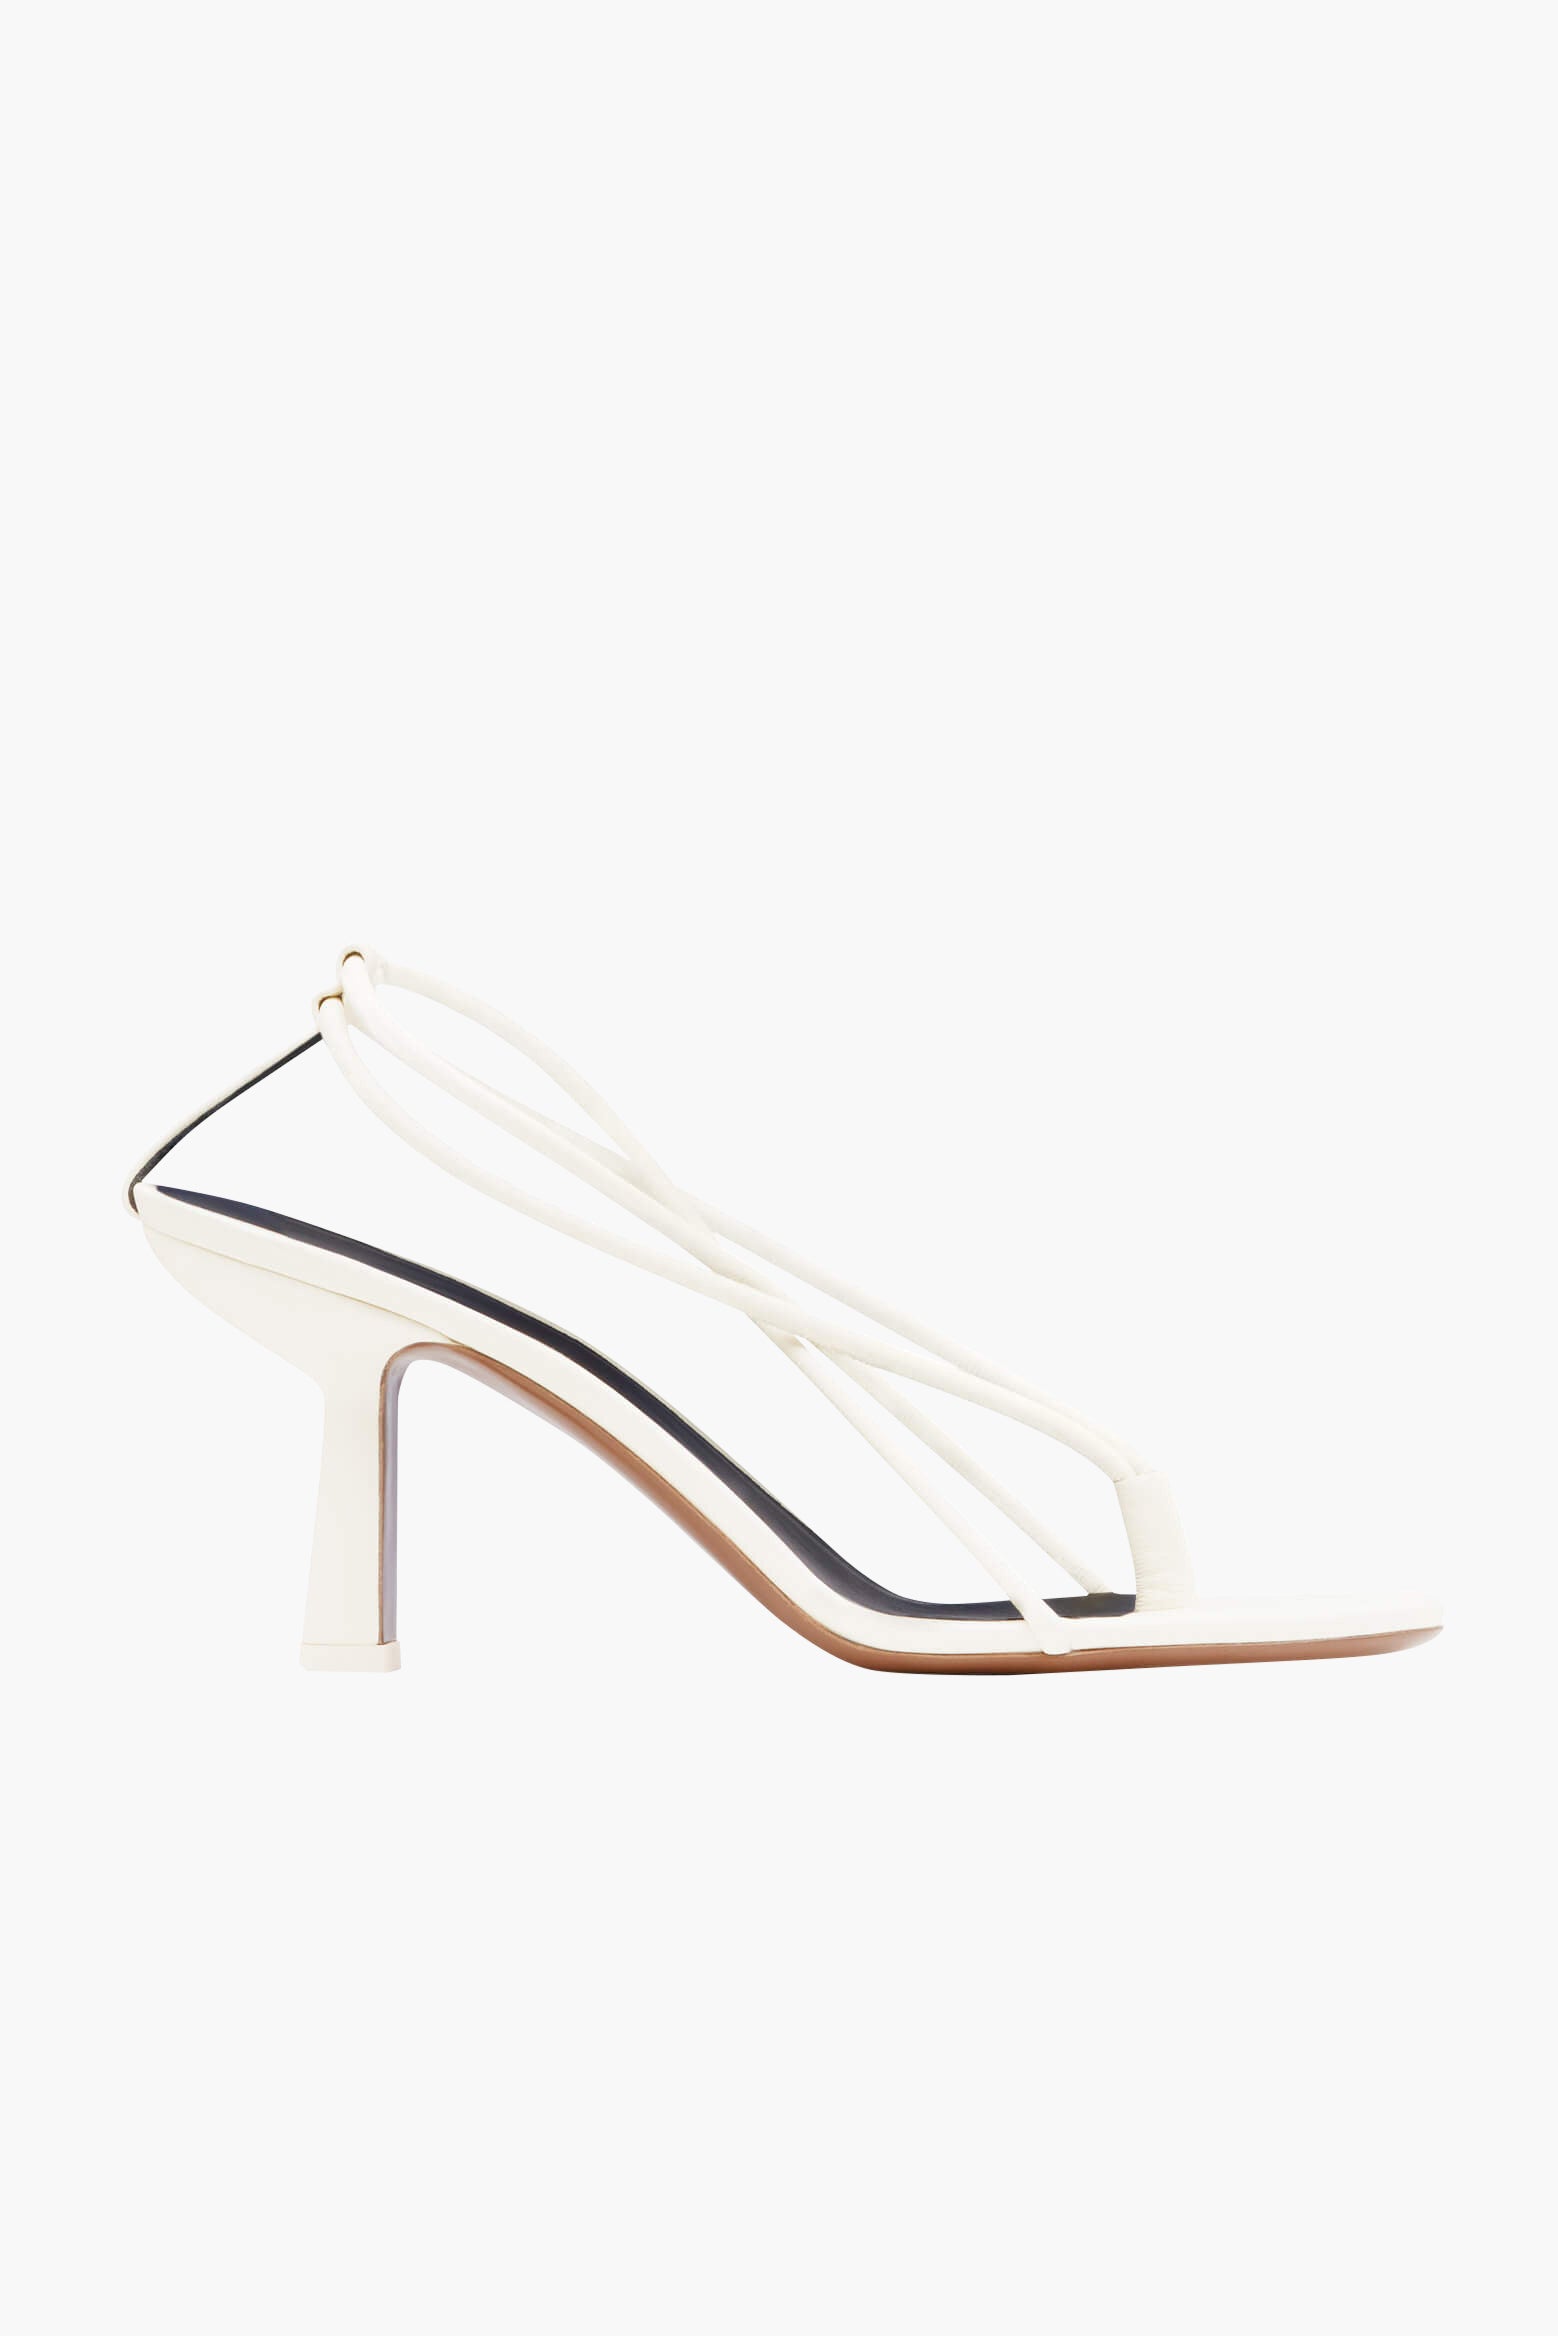 Neous Gloas Slingback Sandal in Cream available at TNT The New Trend Australia.